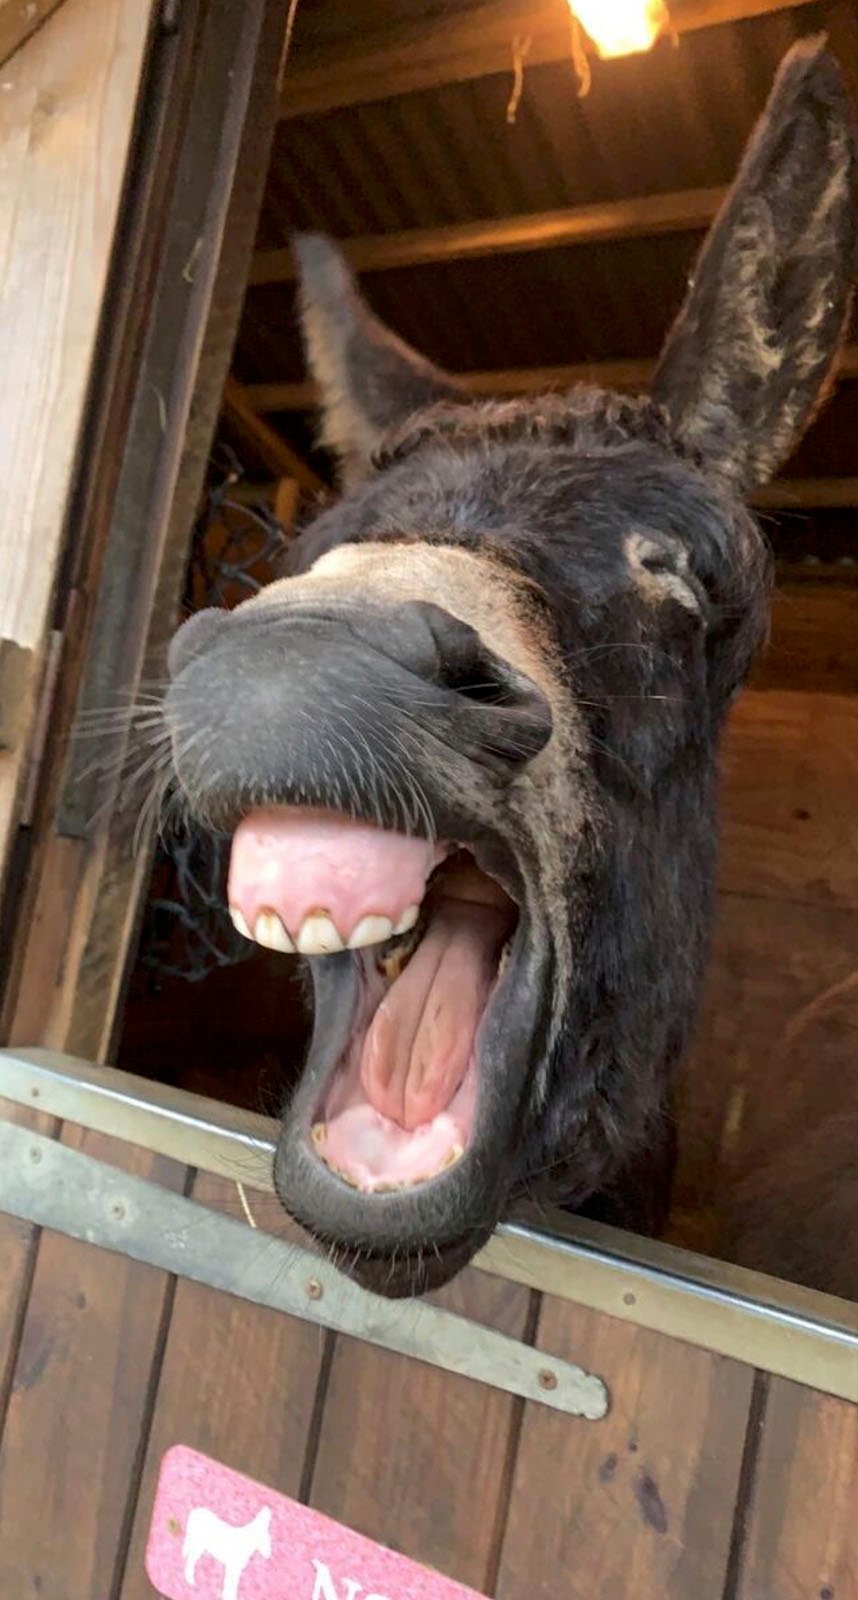 A donkey with its mouth wide open, as if braying, poking its head out of a stable window with a dark background.